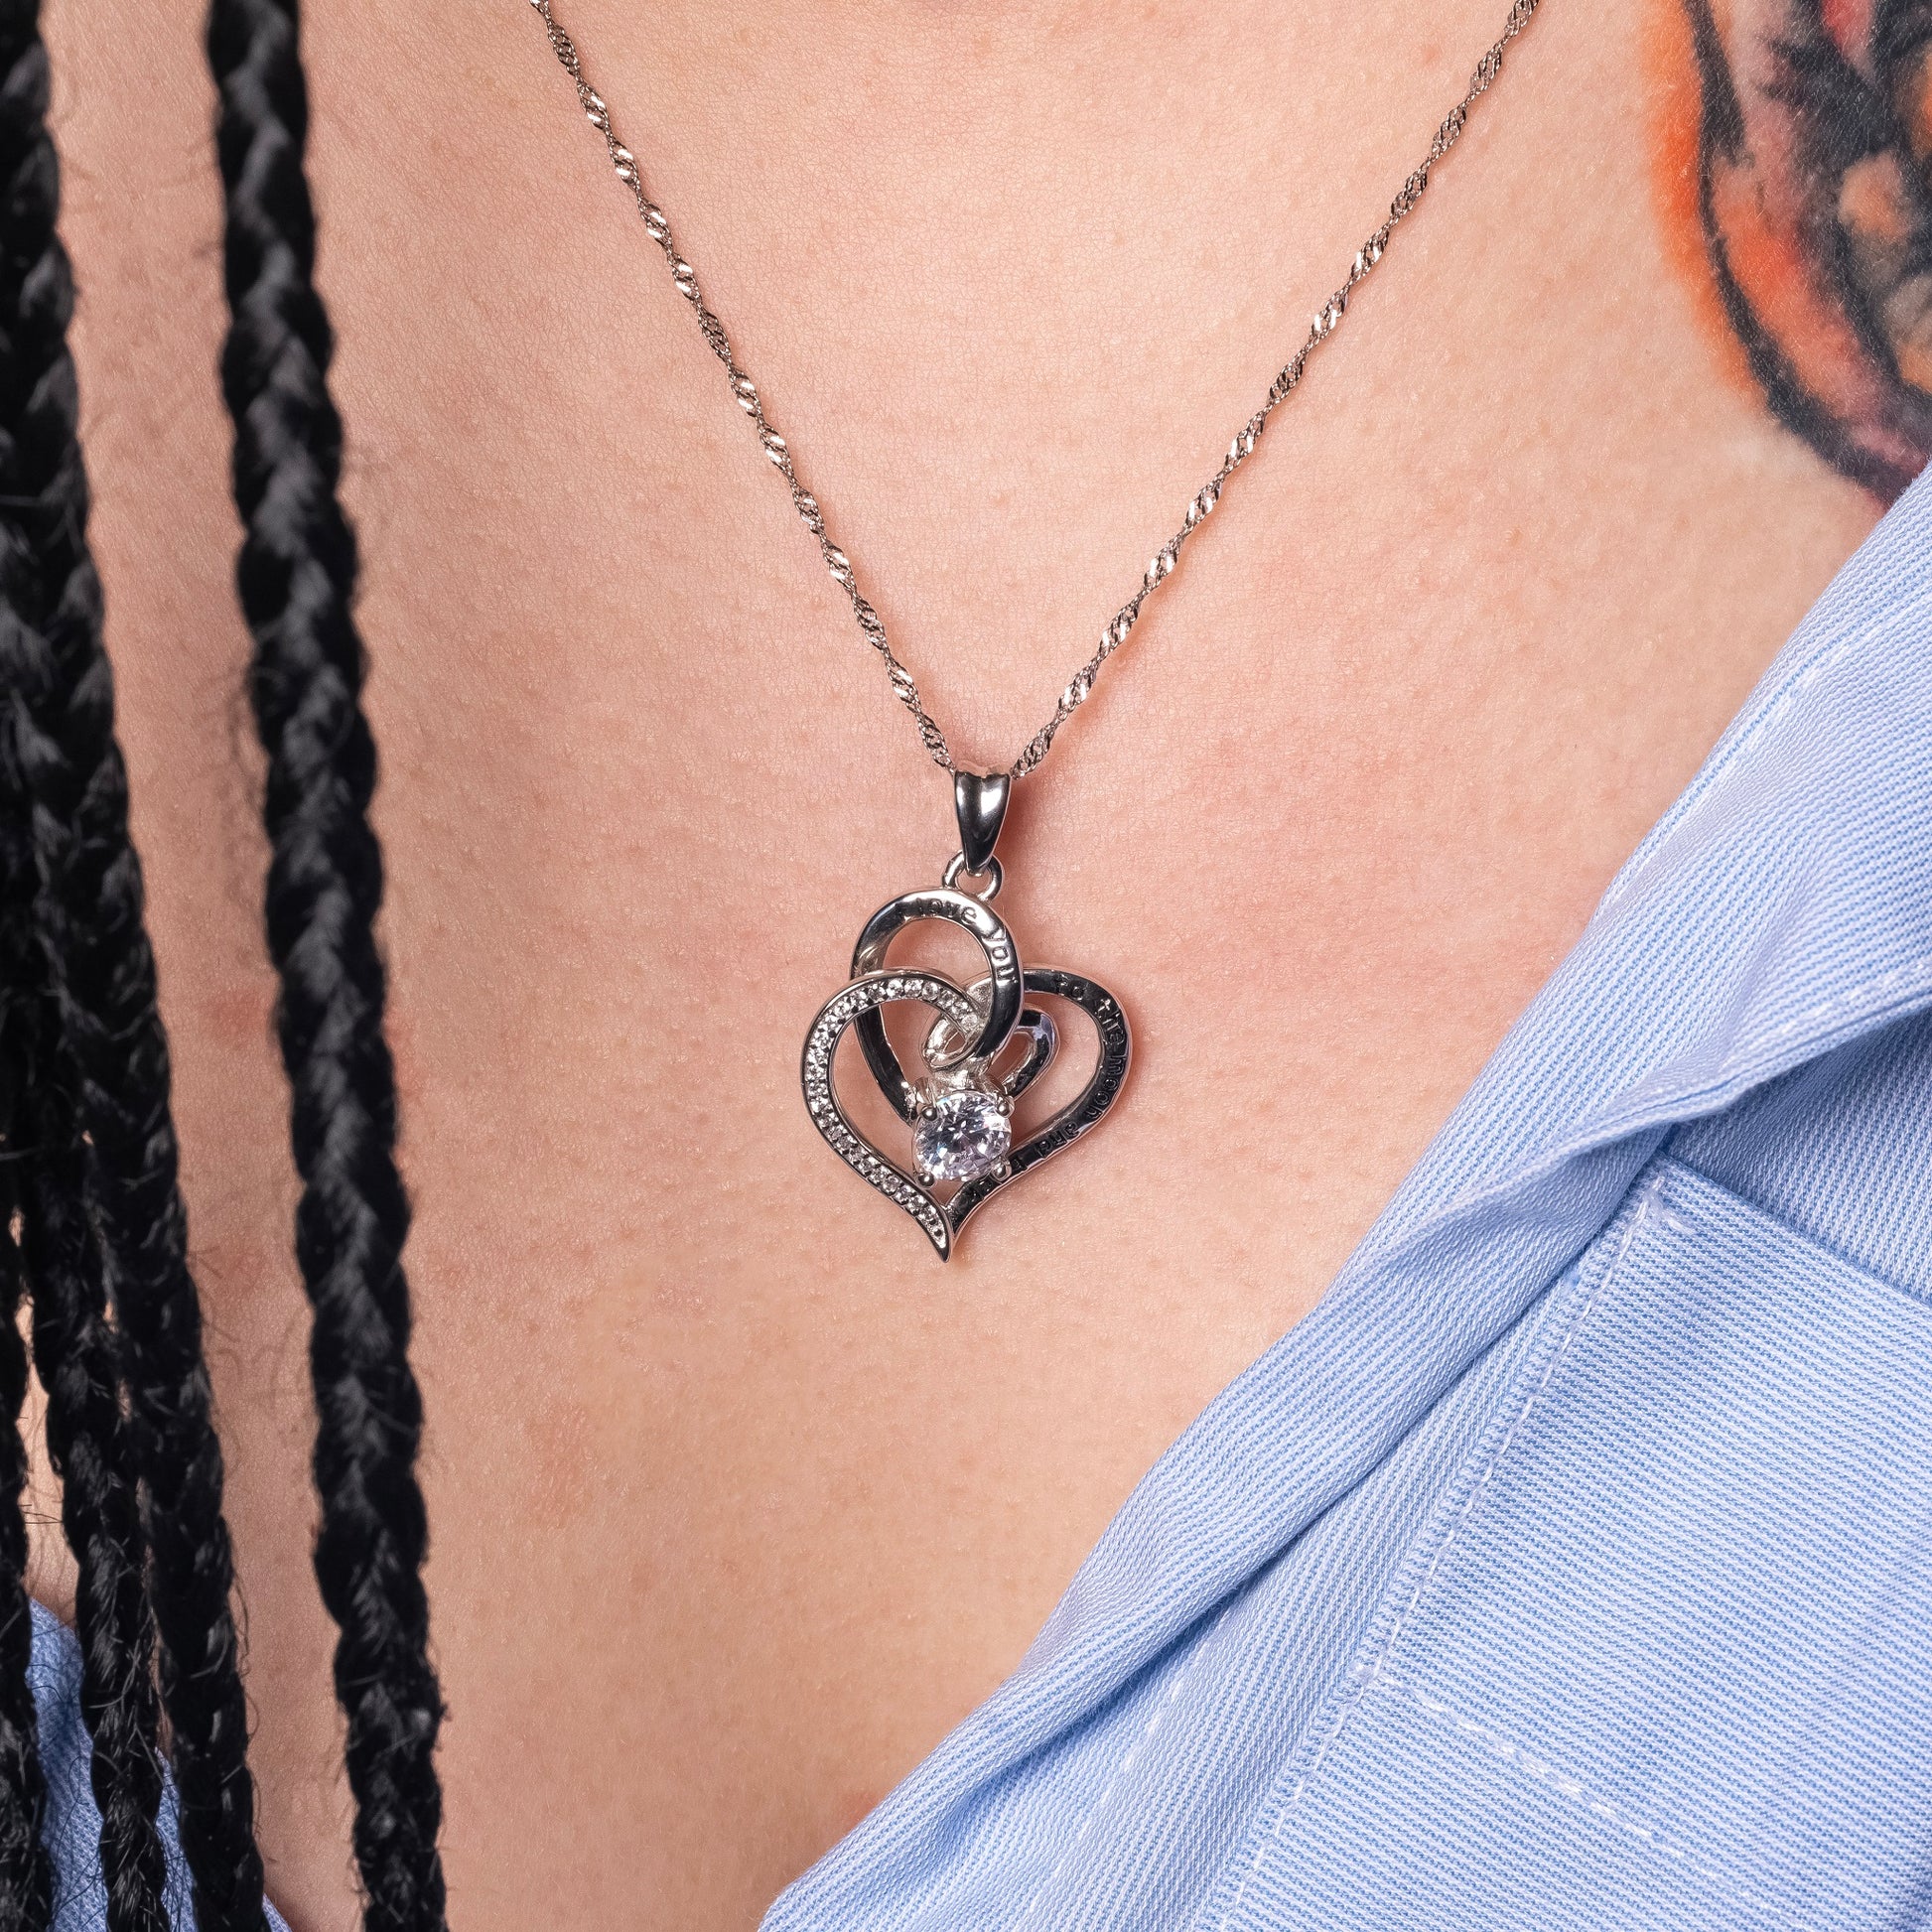 Tatooed Model wearing Twin Love Heart Engraved Pendant paired with Water Wave necklace. Zoomed View